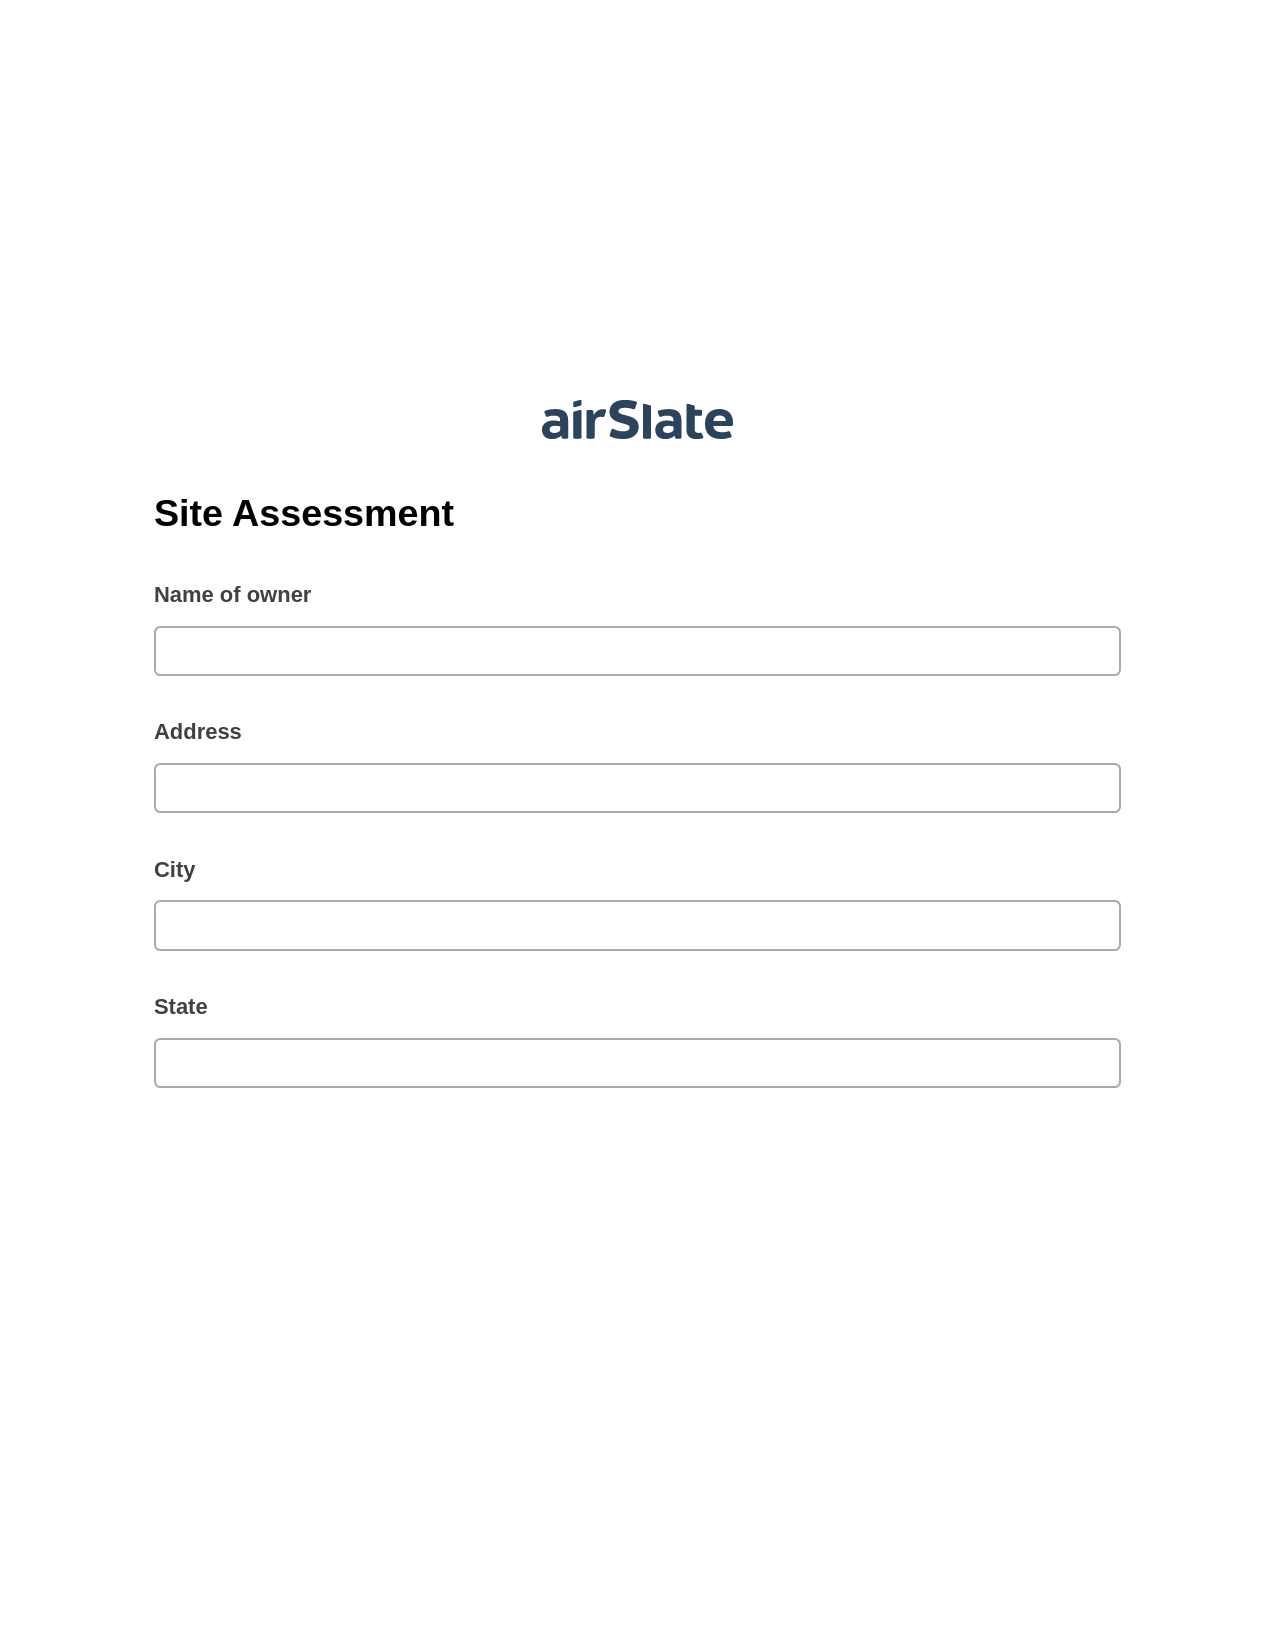 Site Assessment Pre-fill Slate from MS Dynamics 365 Records Bot, Mailchimp send Campaign bot, Export to Smartsheet